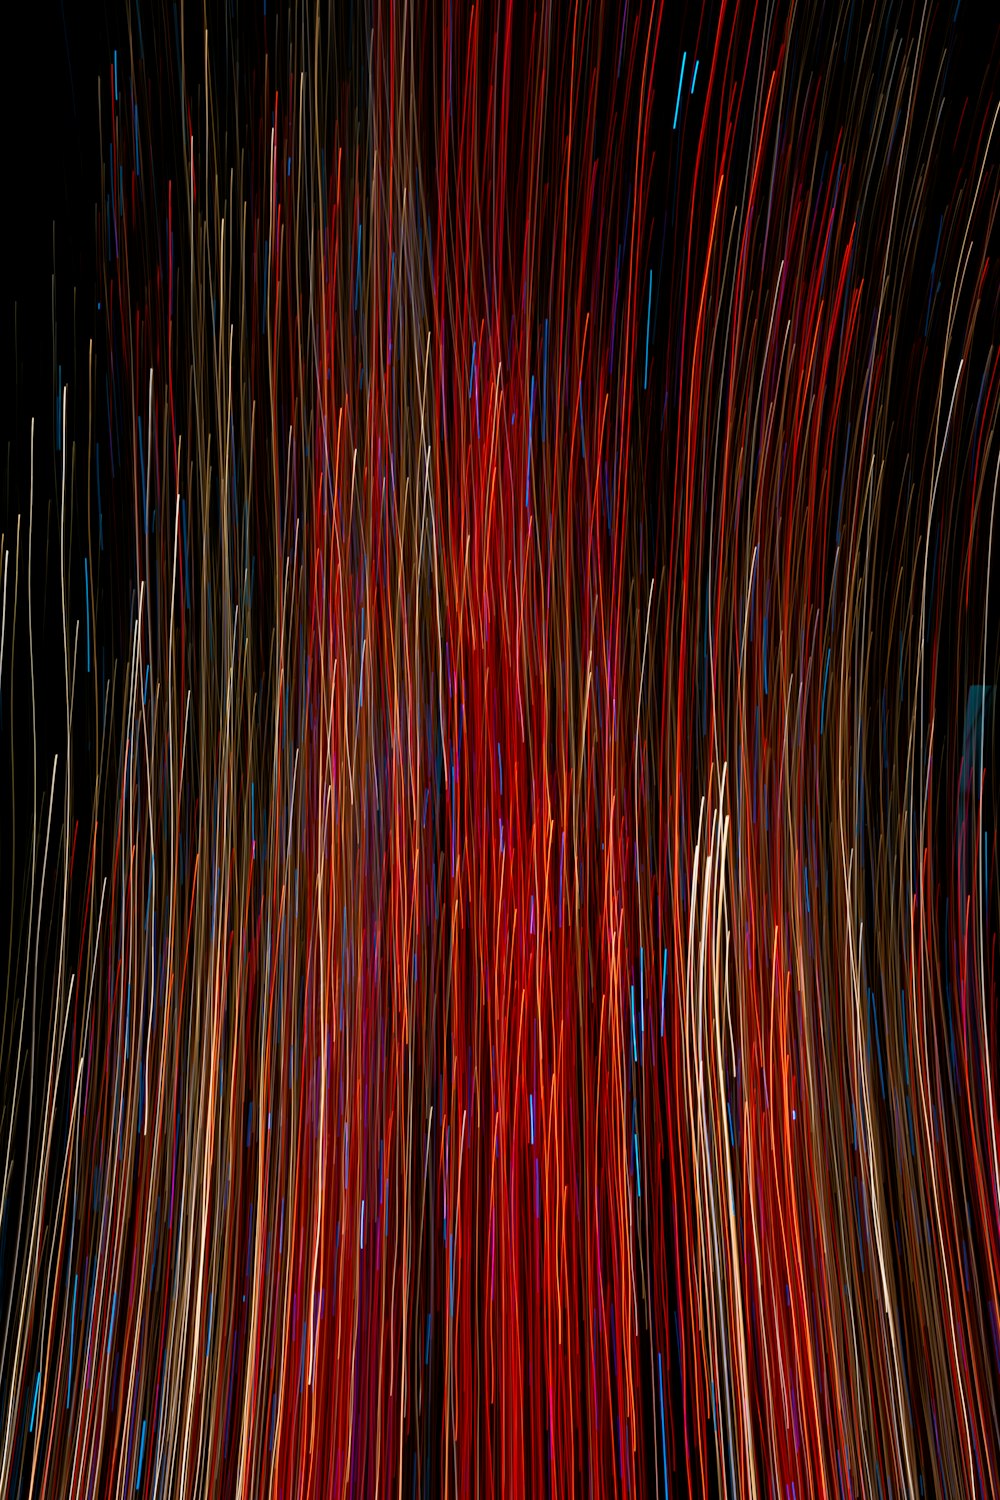 a very long exposure of red and blue lines